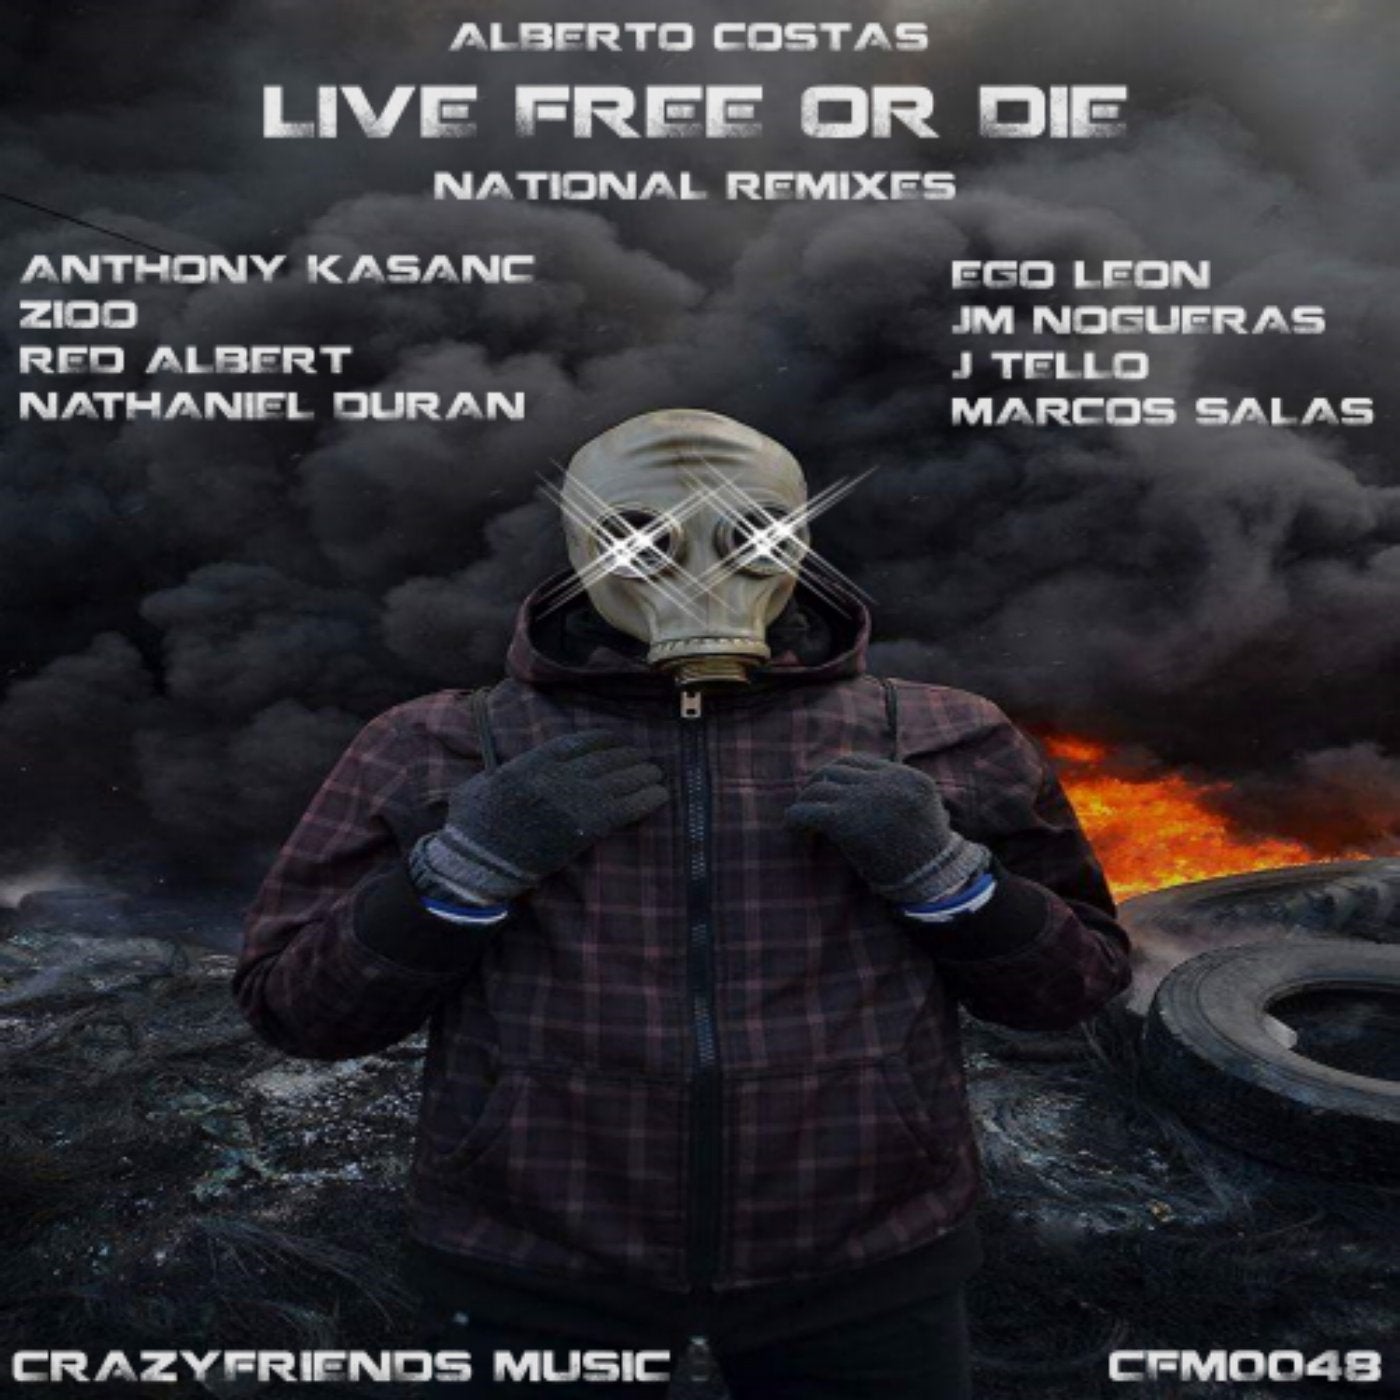 Live Free Or Die National Remixes